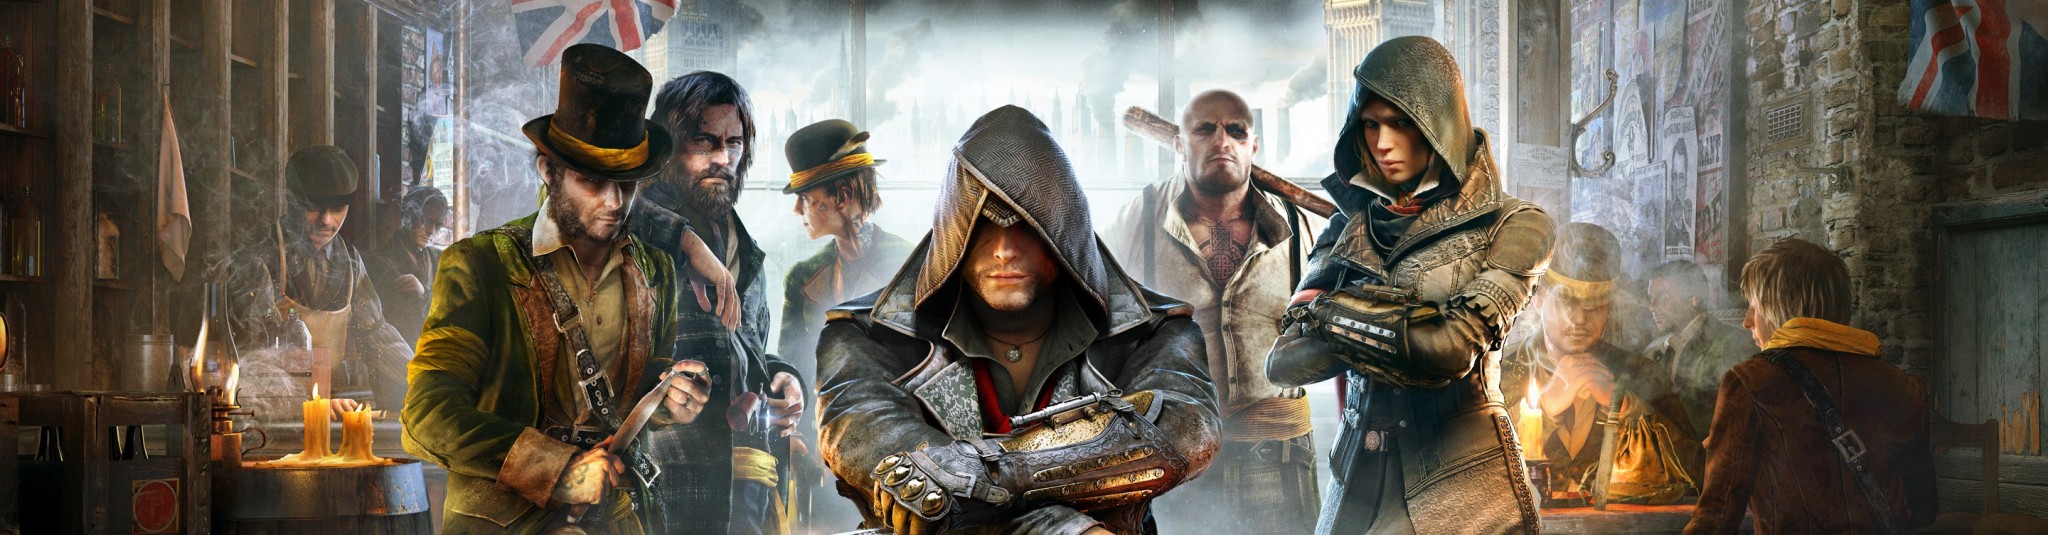 Assassins-Creed-Syndicate1